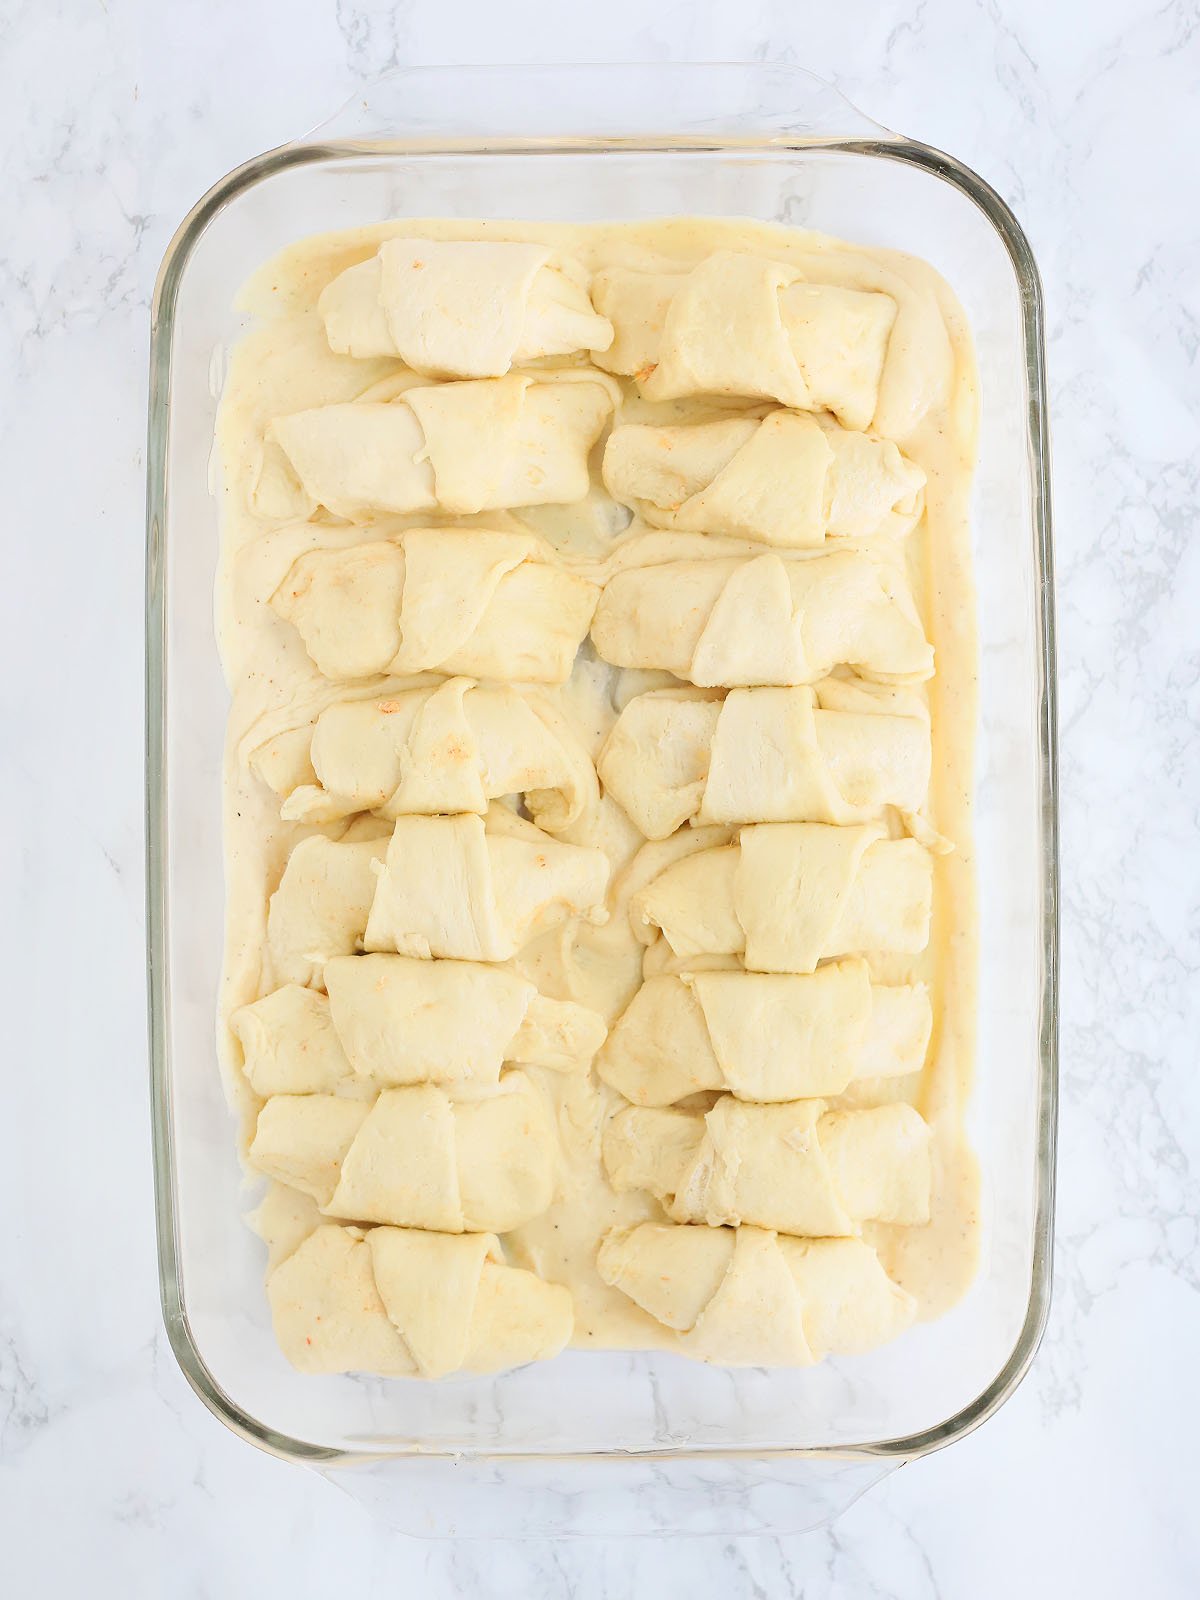 unbaked stuffed and rolled crescents arranged over gravy in a glass casserole dish